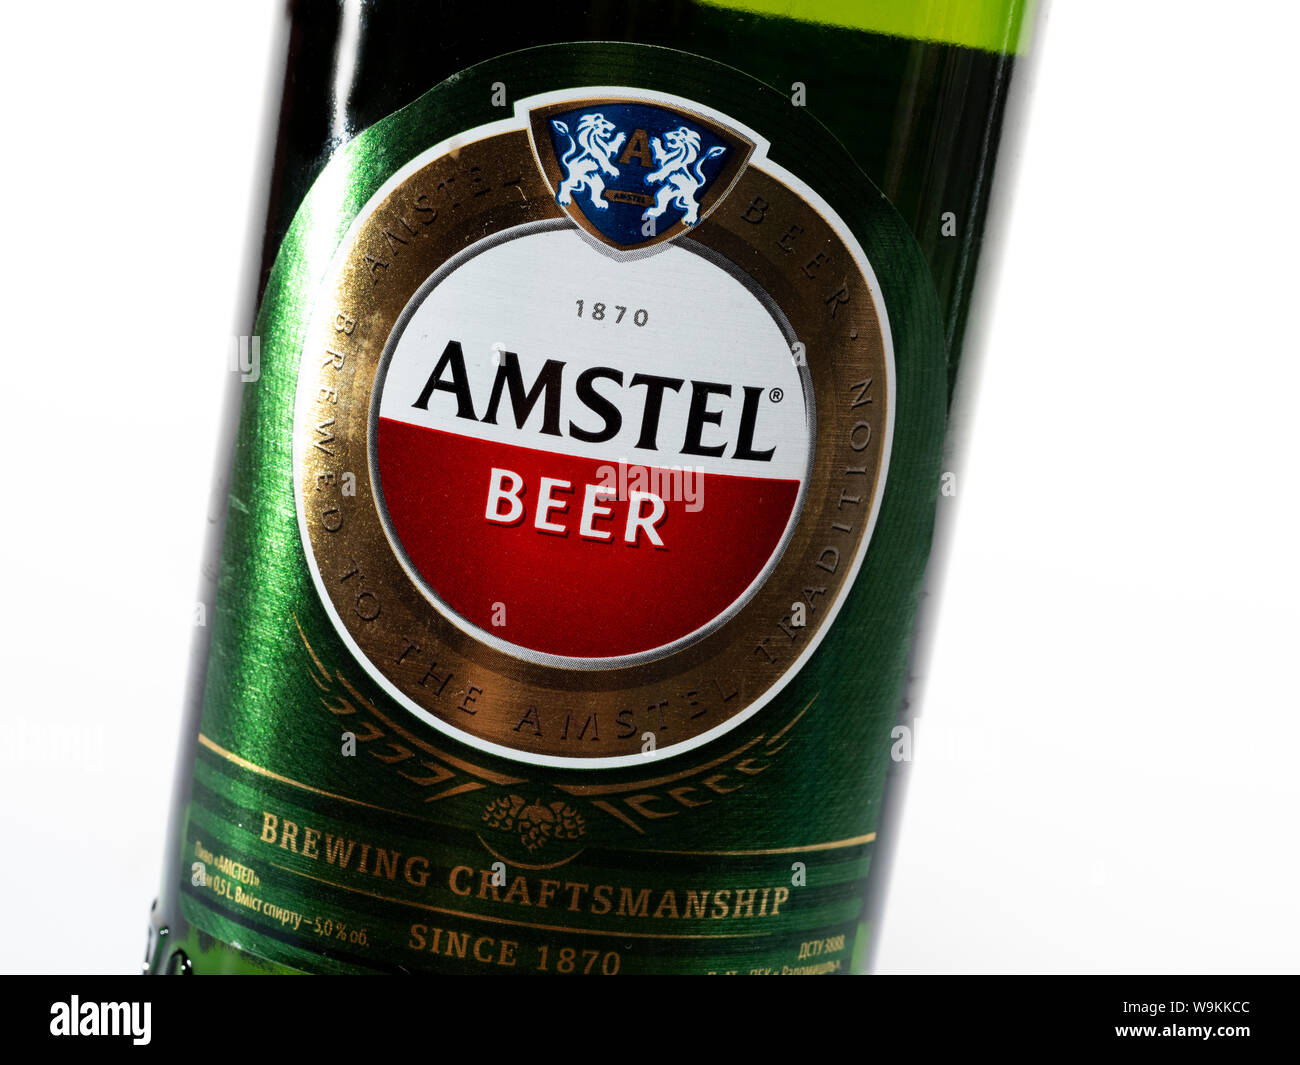 Amstel beer 0,5 l bottle isolated on white background Stock Photo